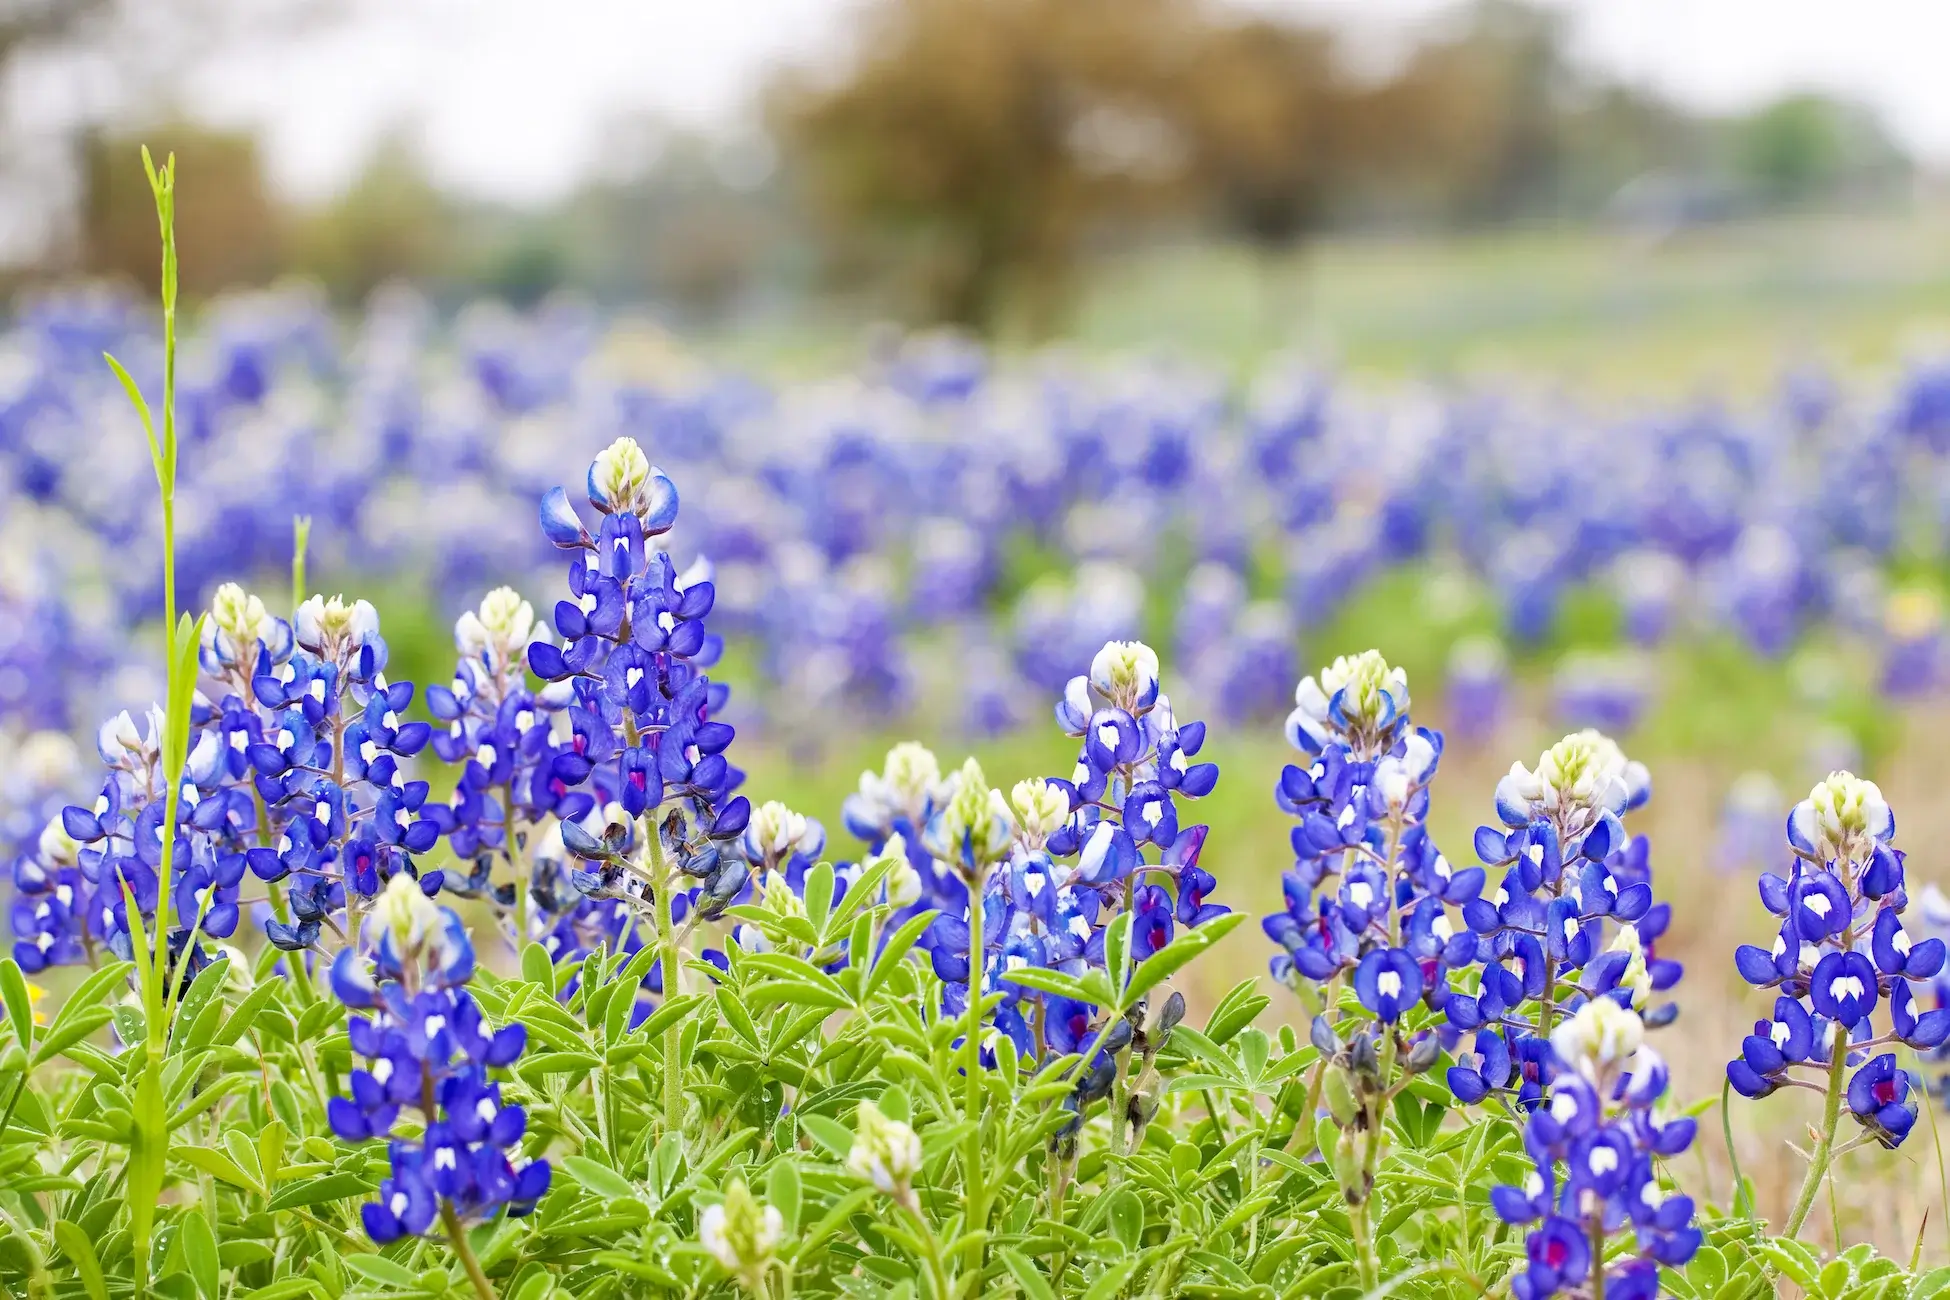 Texas Bluebonnet wildflowers in Texas Hill Country